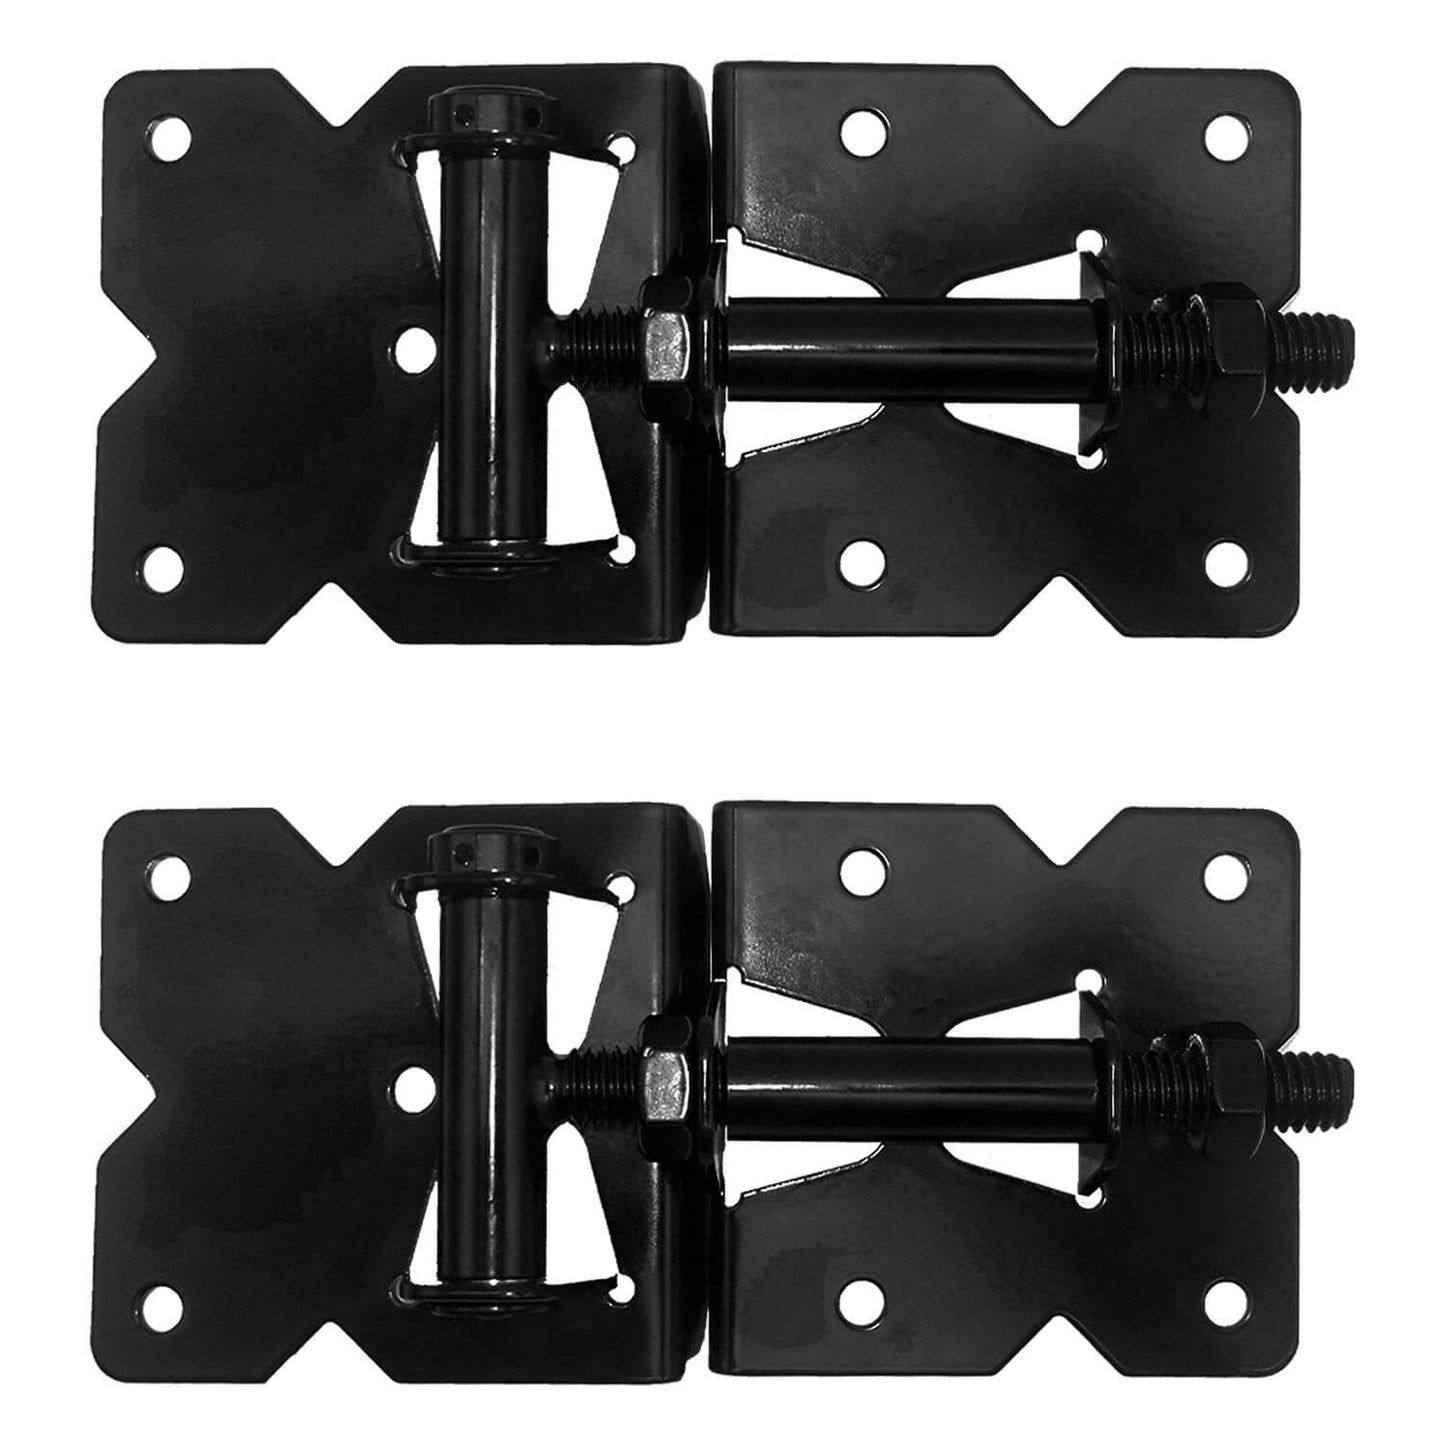 Vinyl Gate Hinges - For Vinyl, PVC or Plastic Fencing. Vinyl Fence Gate Hinges w/Mounting Hardware. Available in Standard and Self-Closing